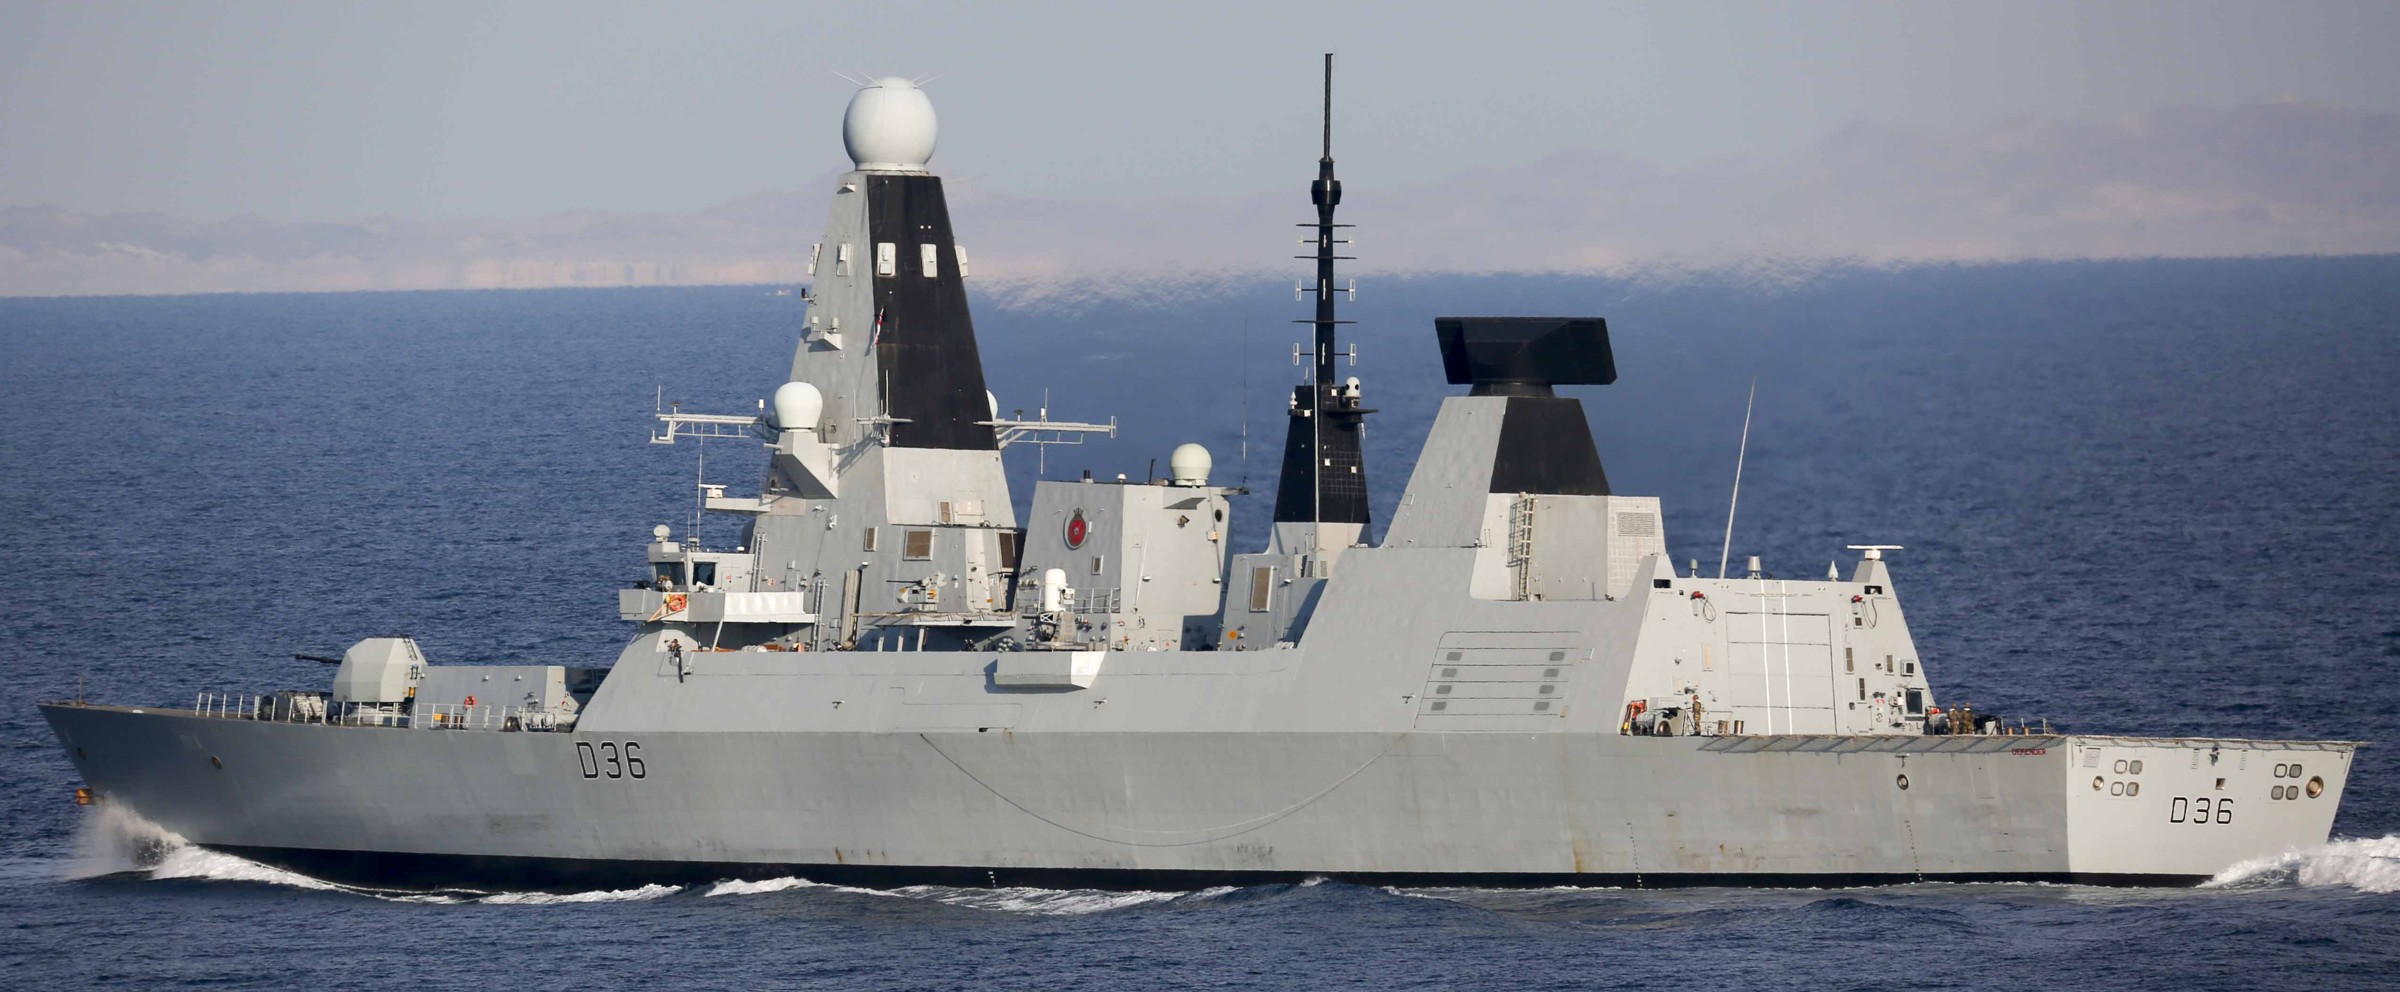 d36 hms defender d-36 type 45 daring class guided missile destroyer ddg royal navy sea viper 11